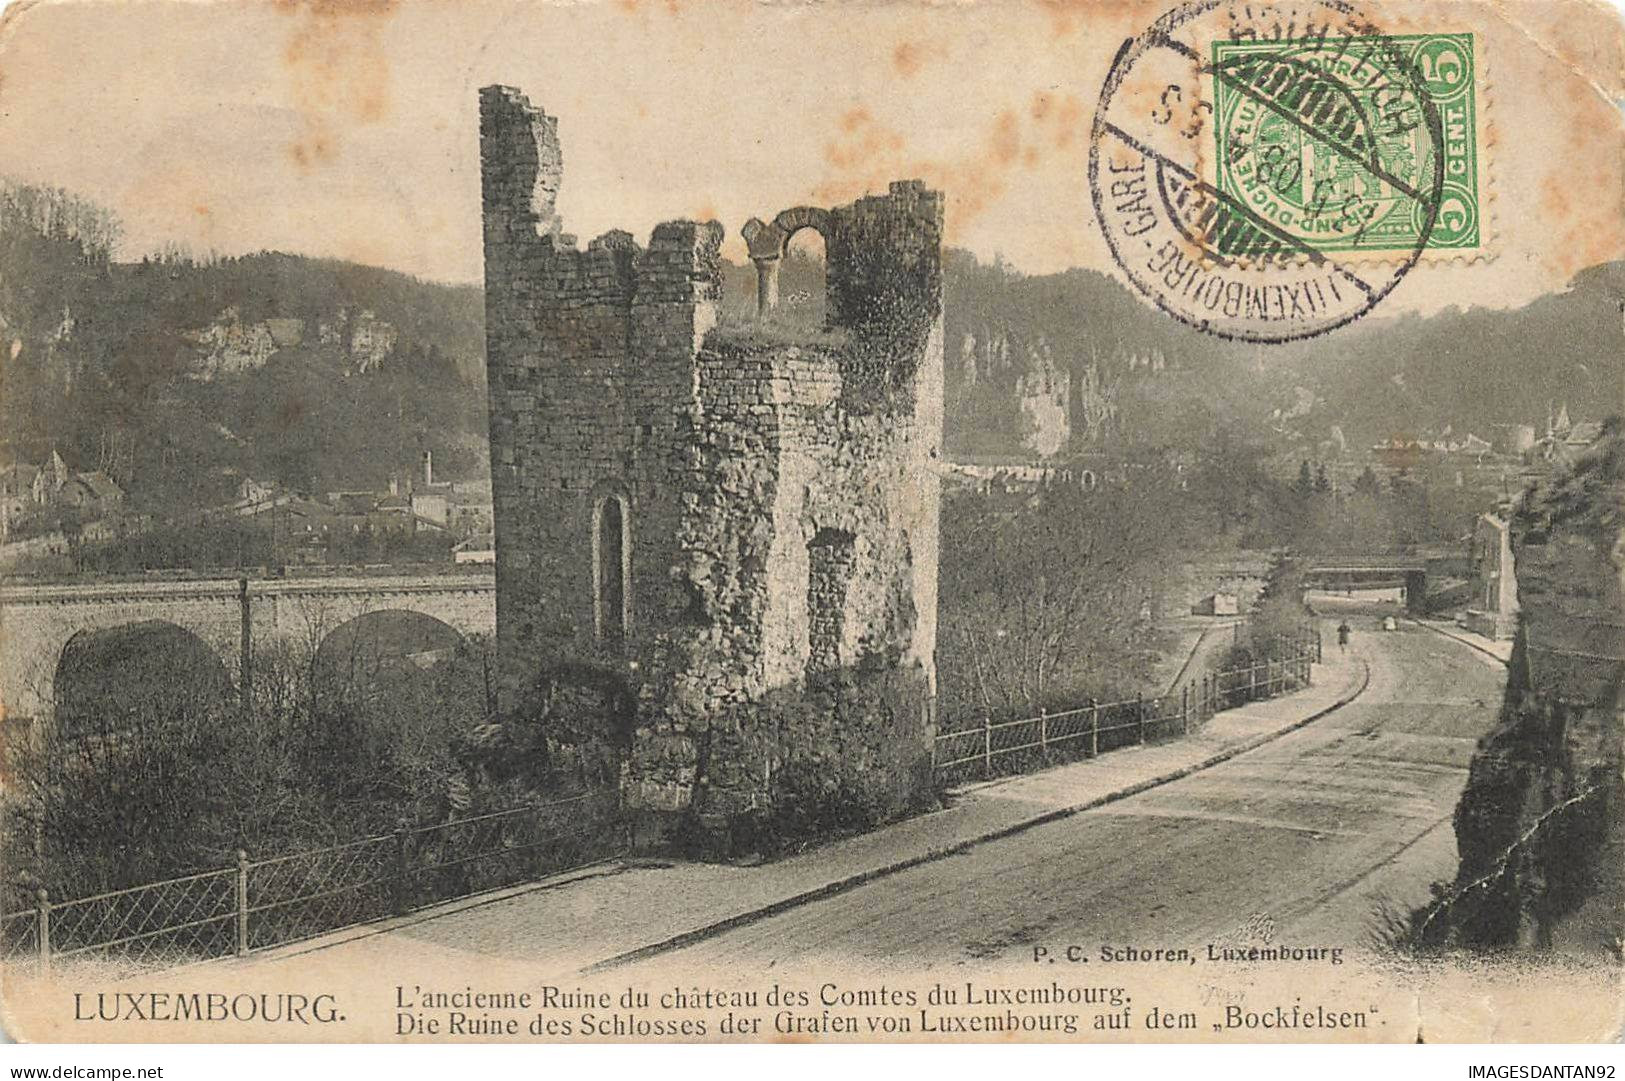 LUXEMBOURG #AS31356 LUXEMBOURG L ANCIENNE RUINE DU CHATEAU DES COMTES DU LUXEMBOURG - Luxembourg - Ville